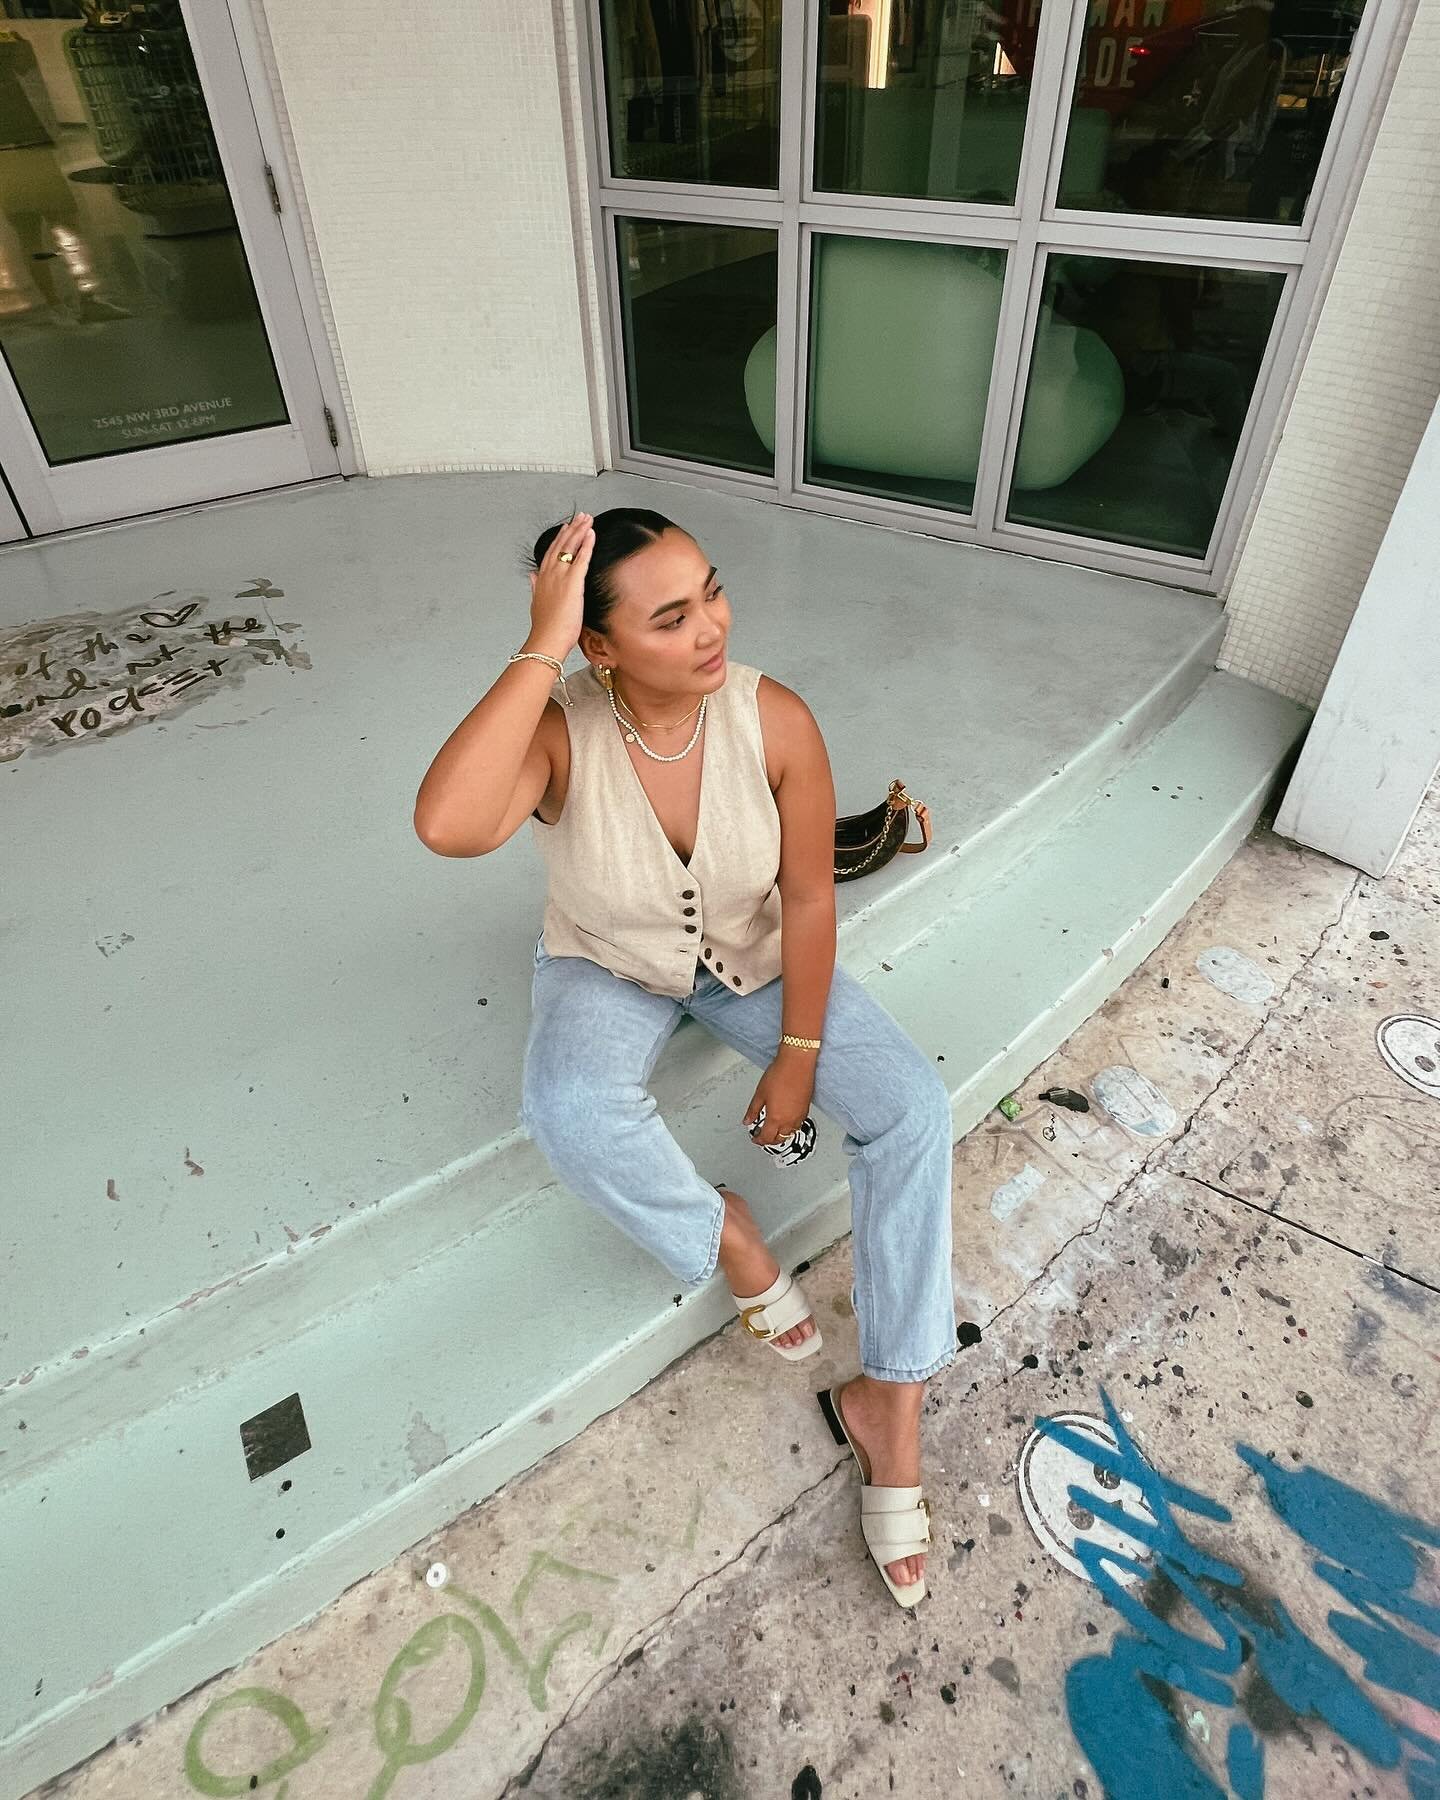 it's officially slick down bun season in Miami 🥵🔥✨
alternative caption: last pic is my fave 🥰

linen vest: @target @targetstyle 
jeans: @stillherenewyork 
sandals: @charleskeithofficial 
jewelry: @emmeclub @joeybabynyc @kozakh.jewelry @lumii_colle